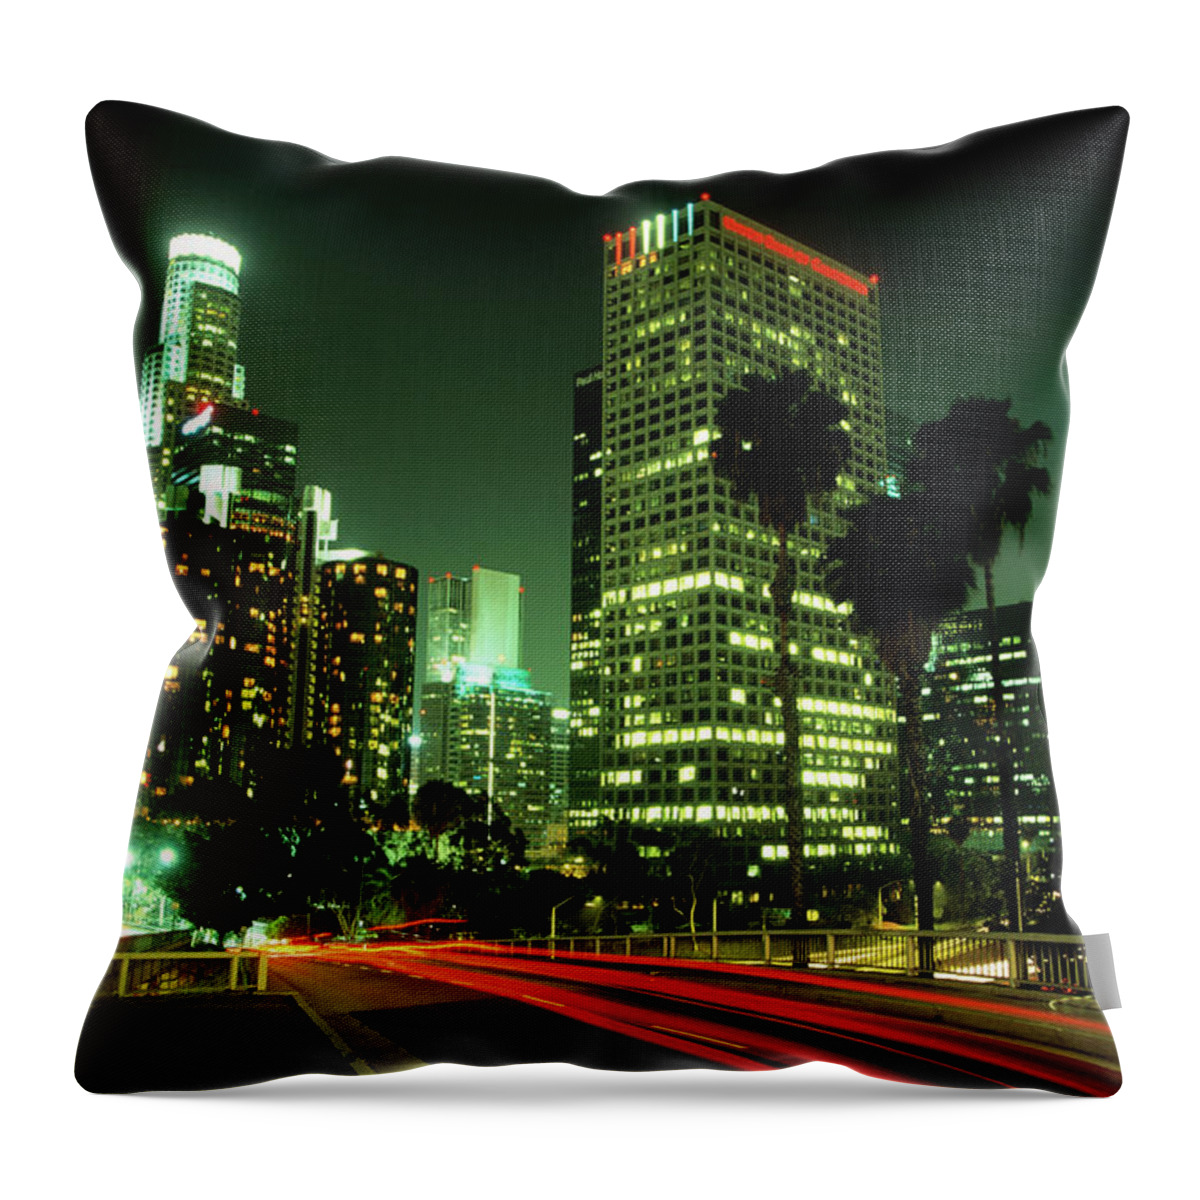 Downtown District Throw Pillow featuring the photograph Los Angeles Skyline At Night #1 by Hisham Ibrahim